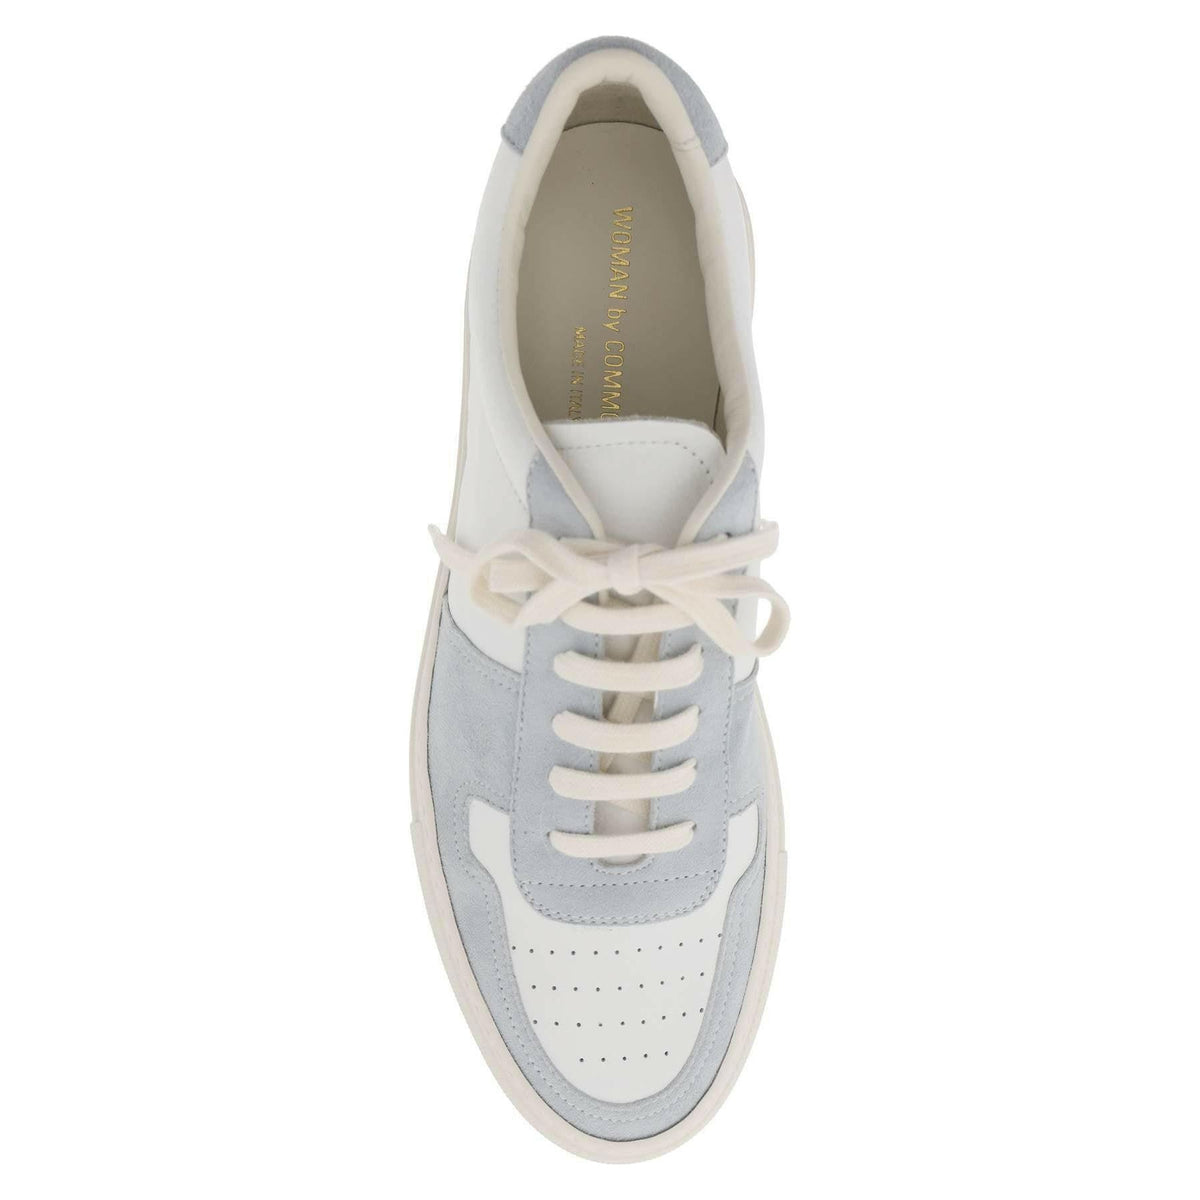 Baby Blue BBall Nappa Leather Sneakers COMMON PROJECTS JOHN JULIA.